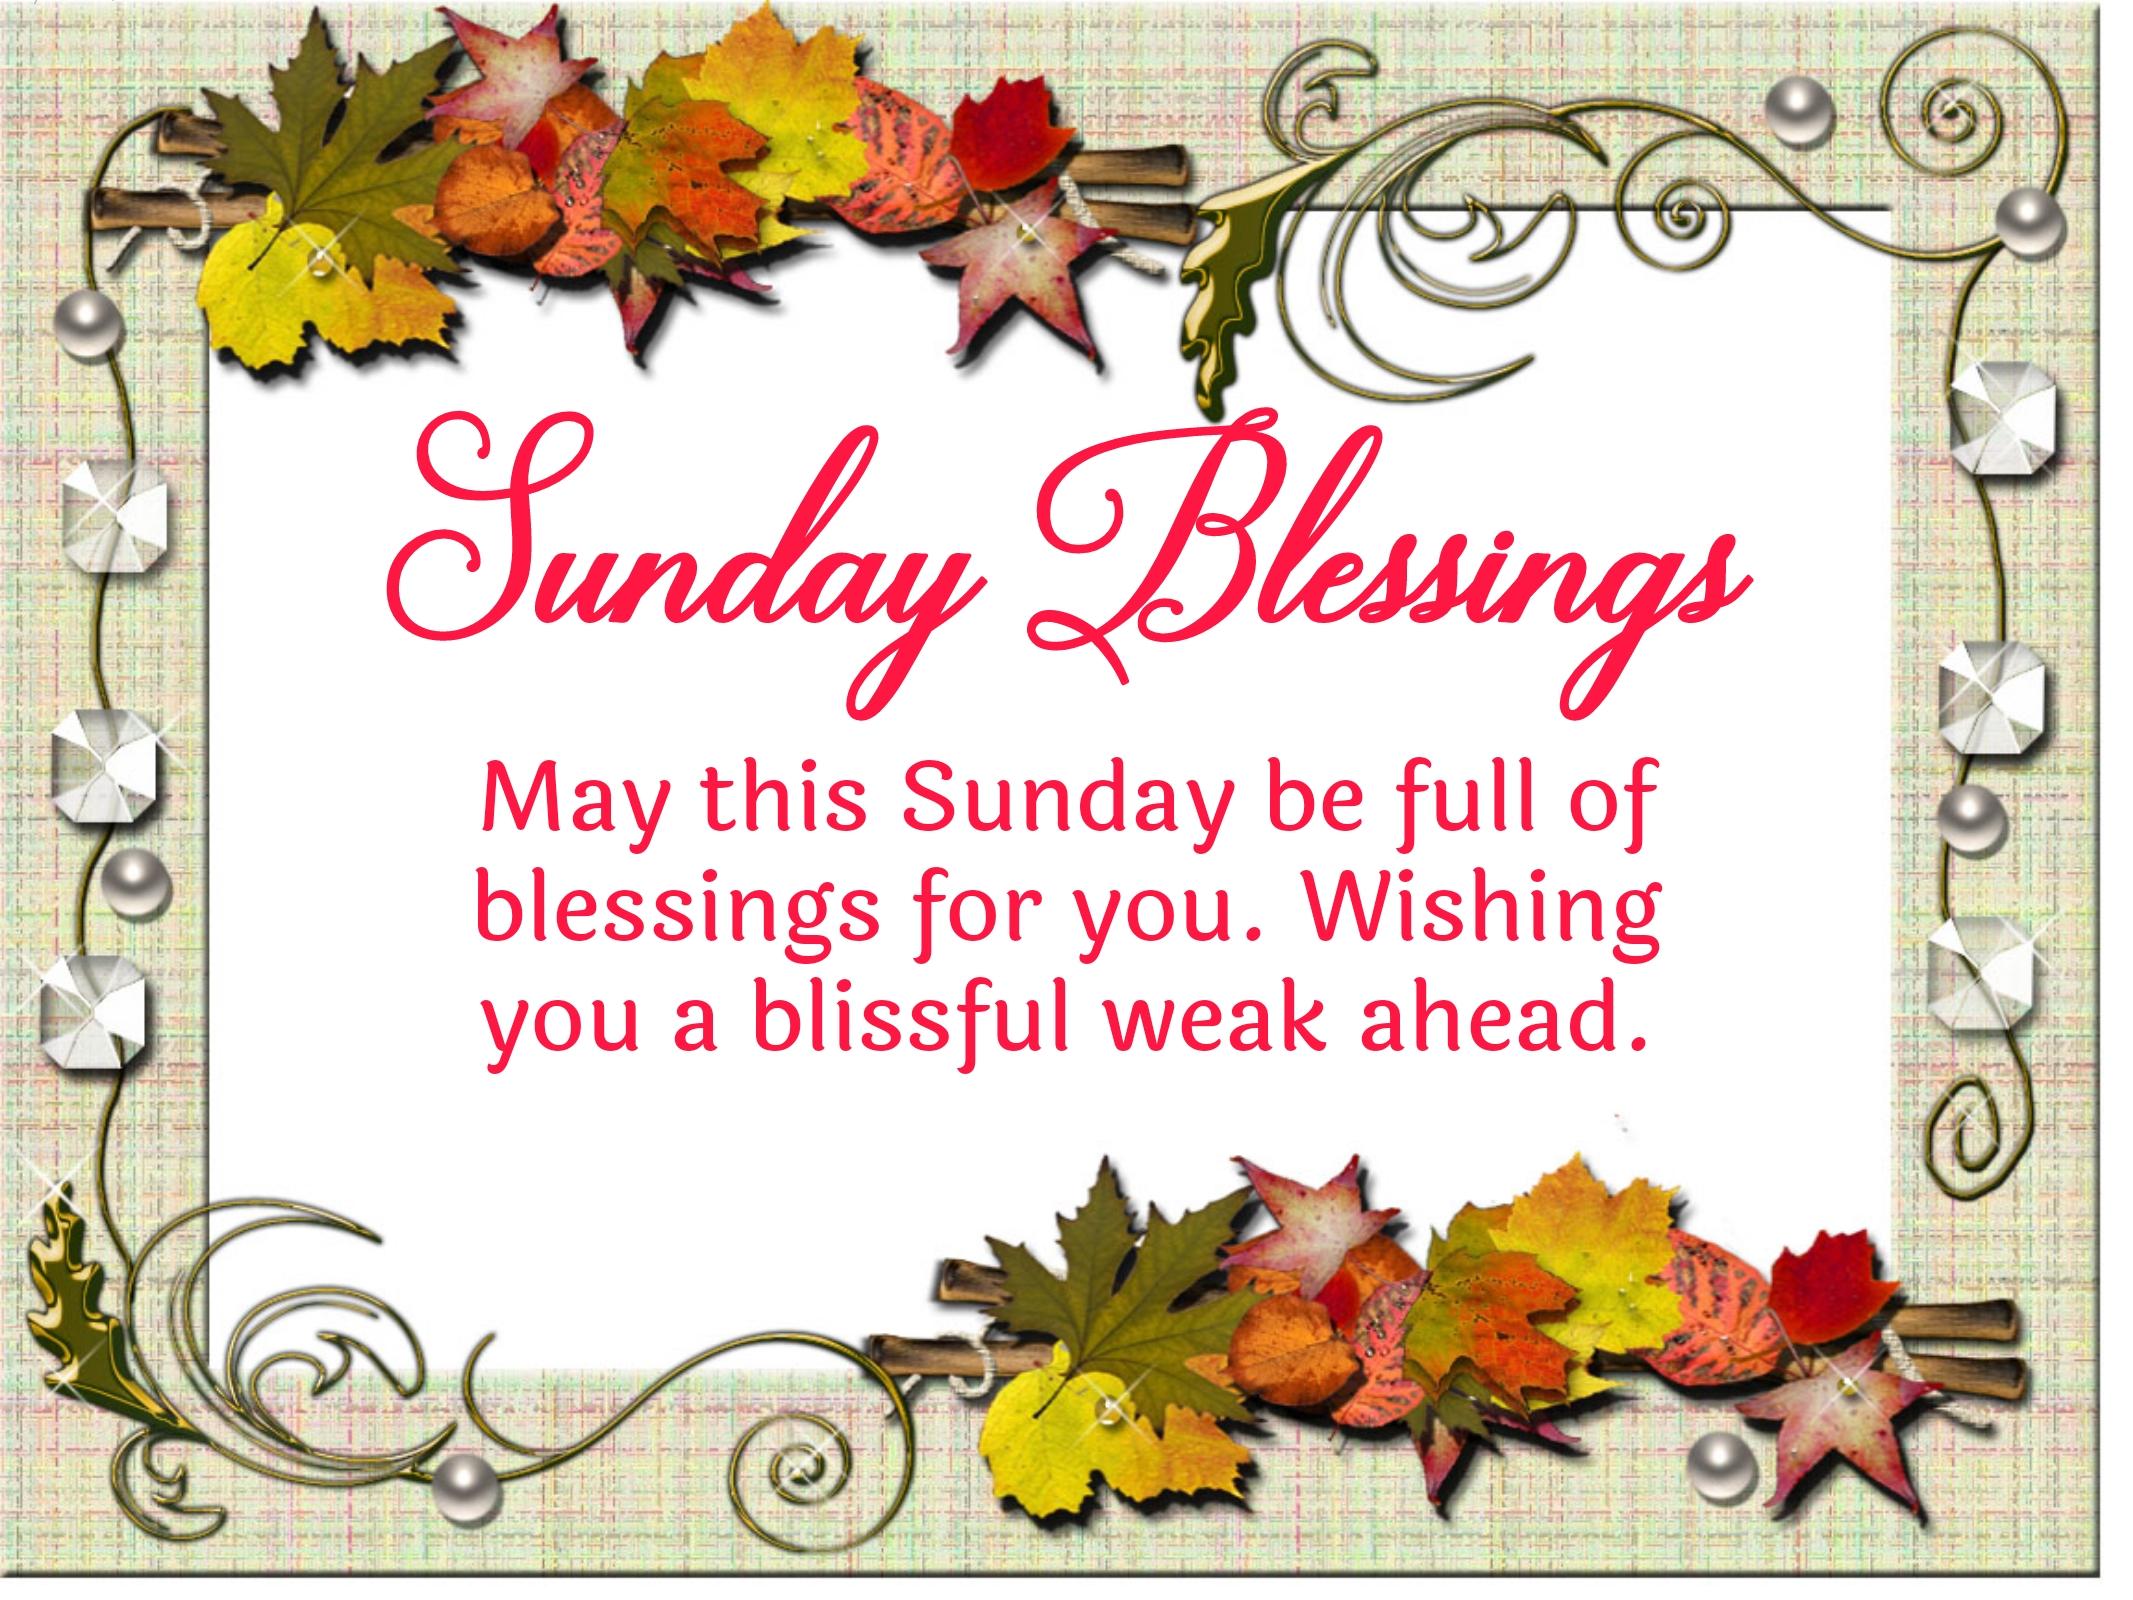 May this Sunday be full of blessings for you